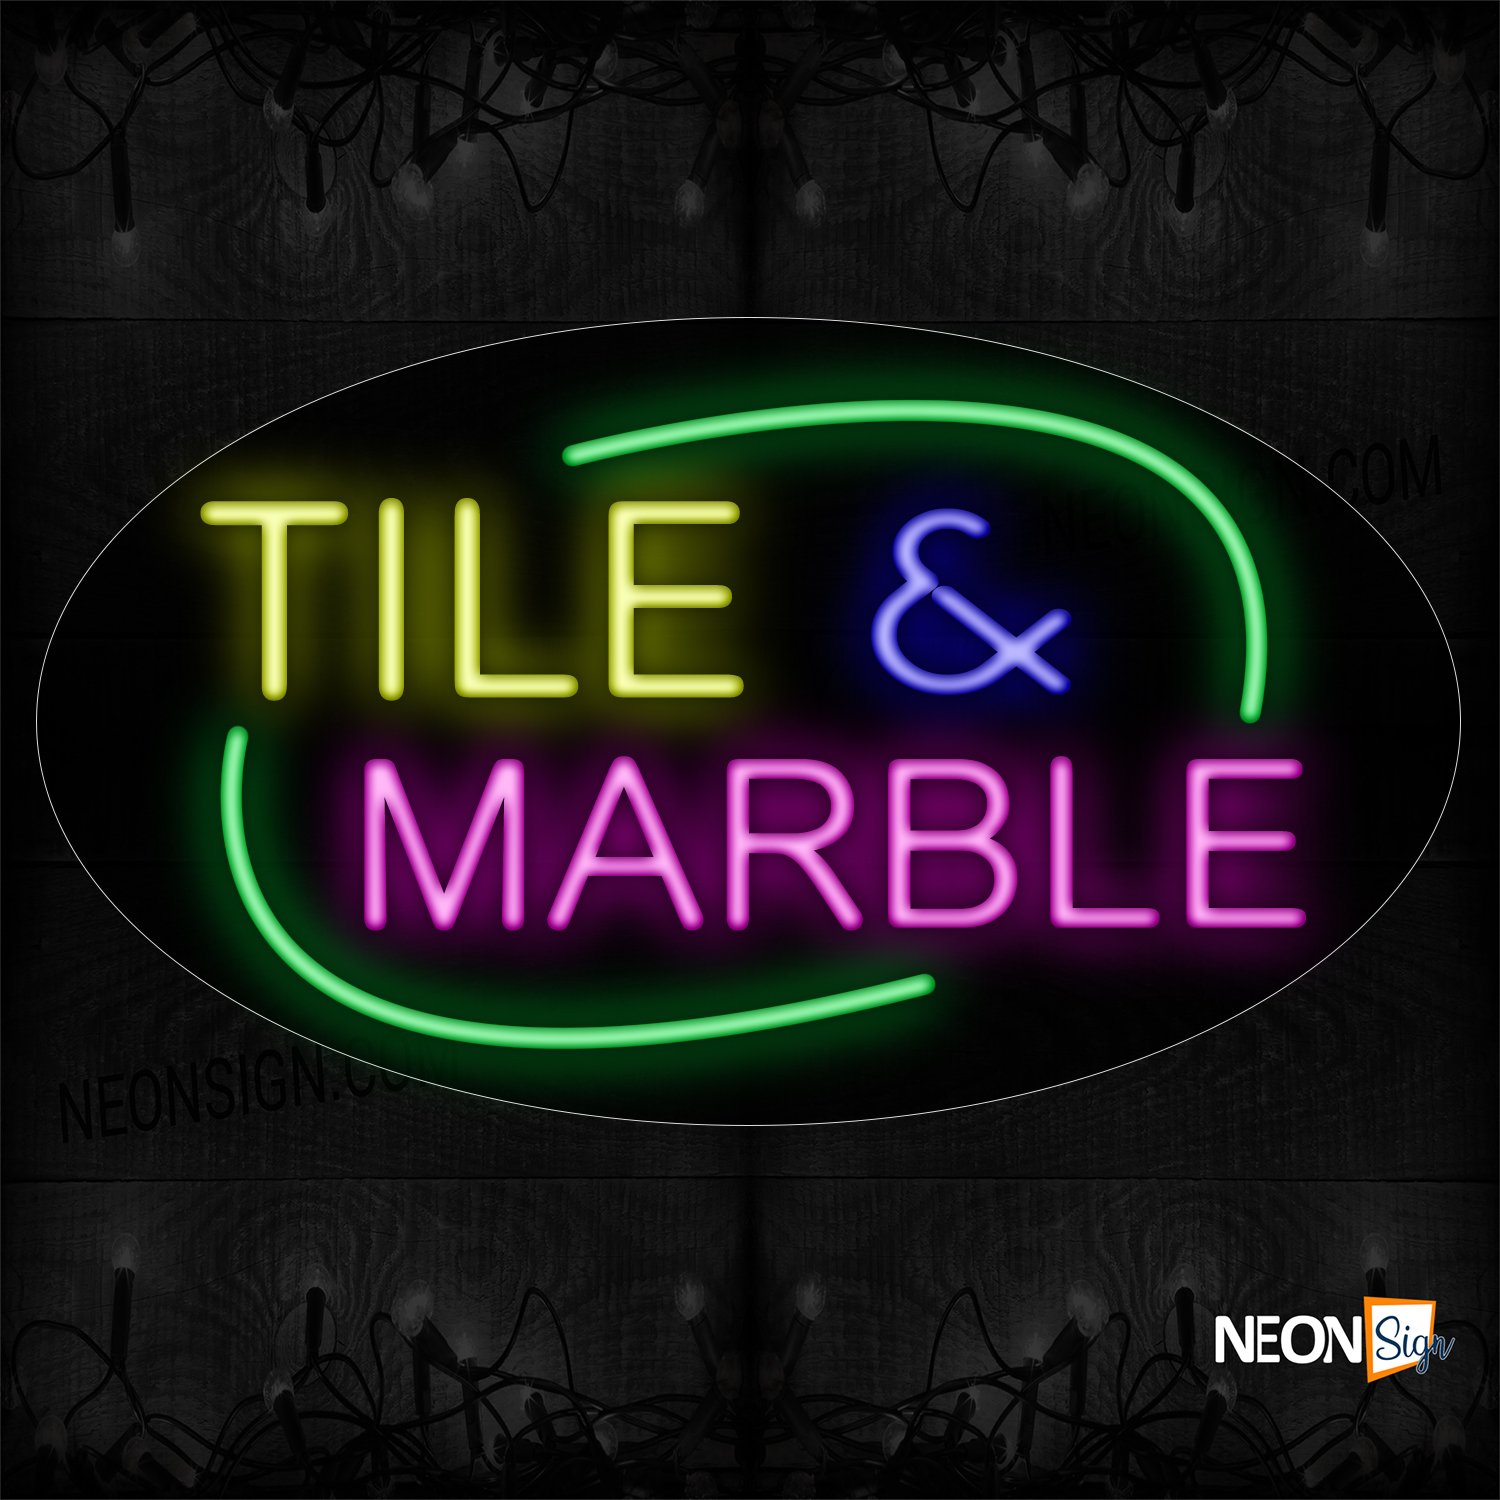 Image of 14486 Tile & Marble With Circle Border Neon Sign_17x30 Contoured Black Backing